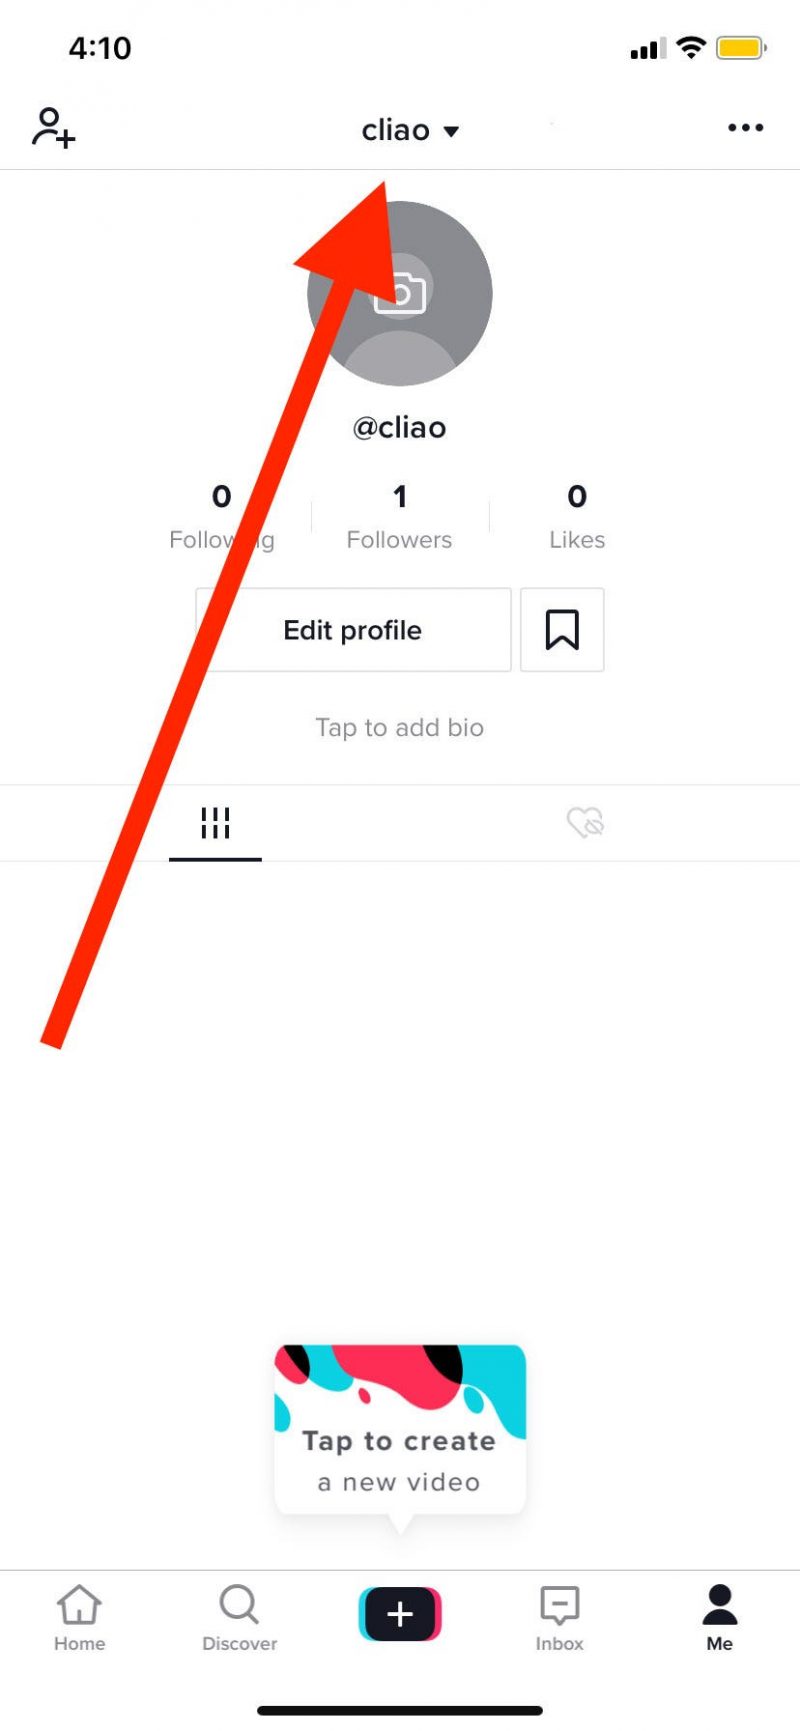 How to make a new account on TikTok